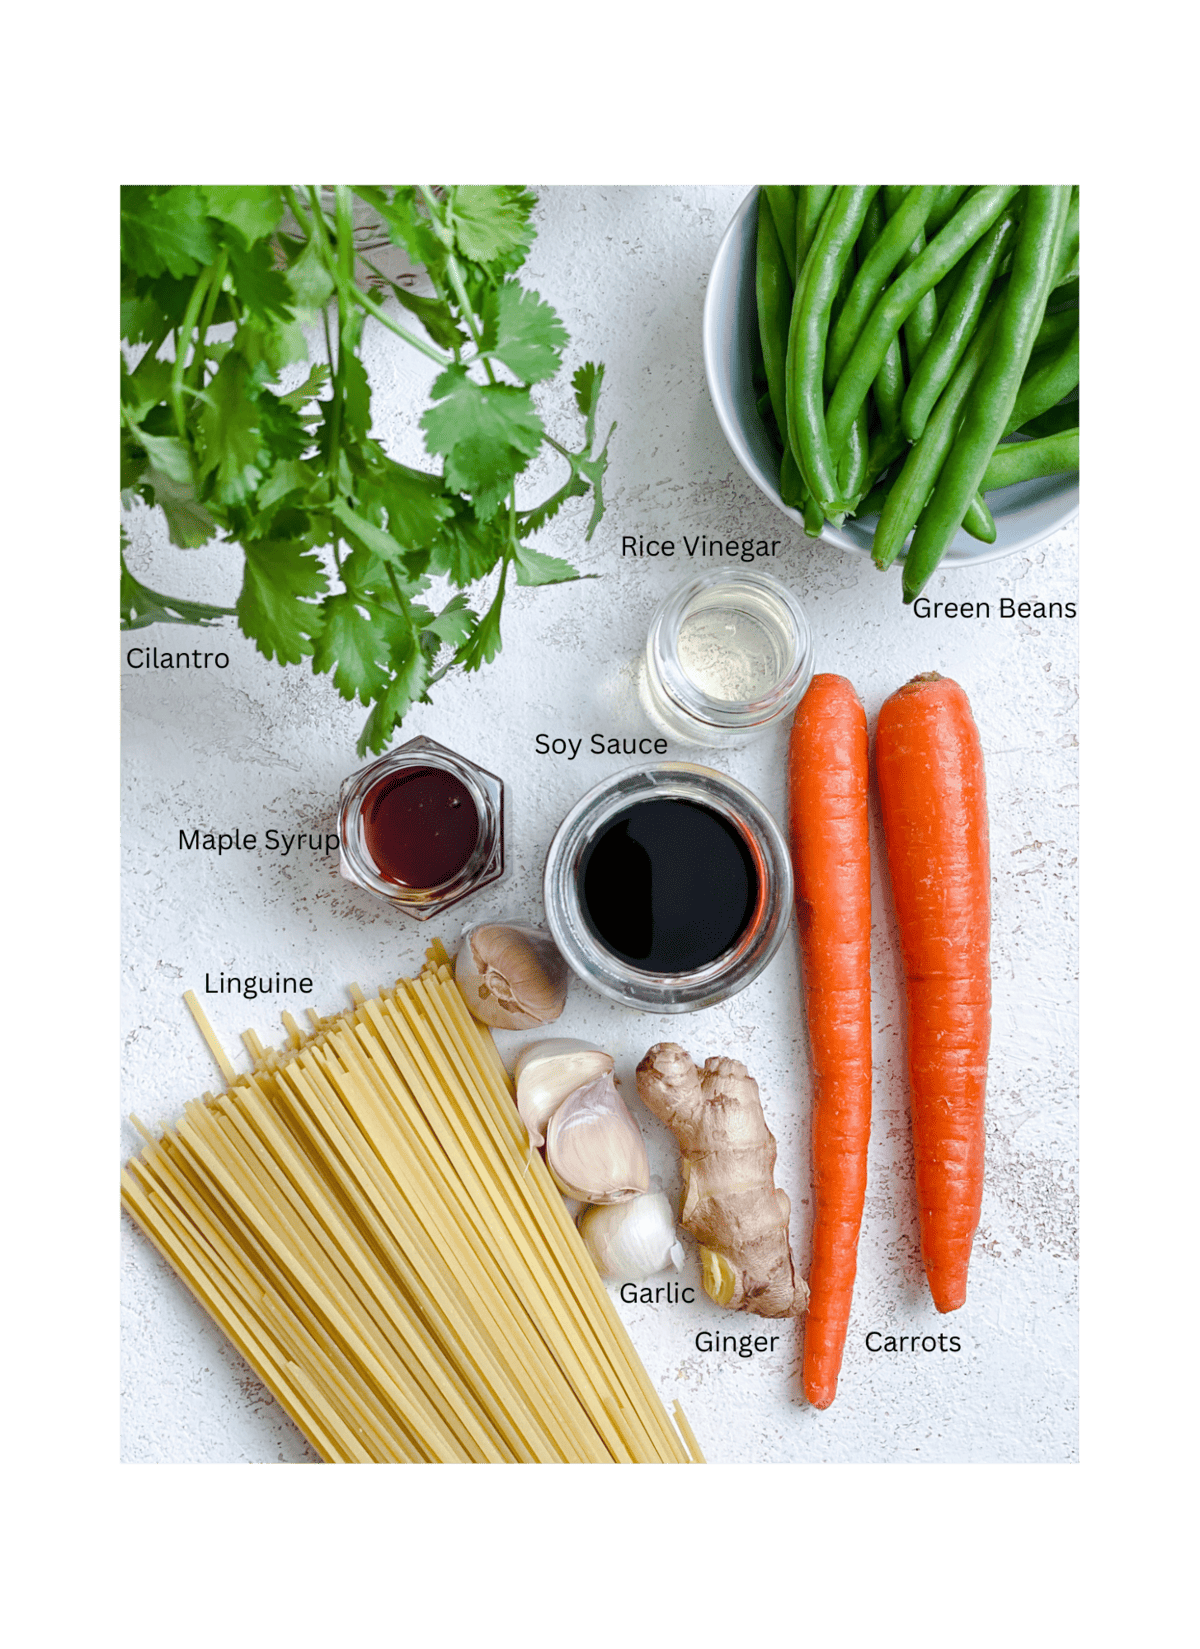 ingredients for Easy Teriyaki Noodles measured out against a white surface